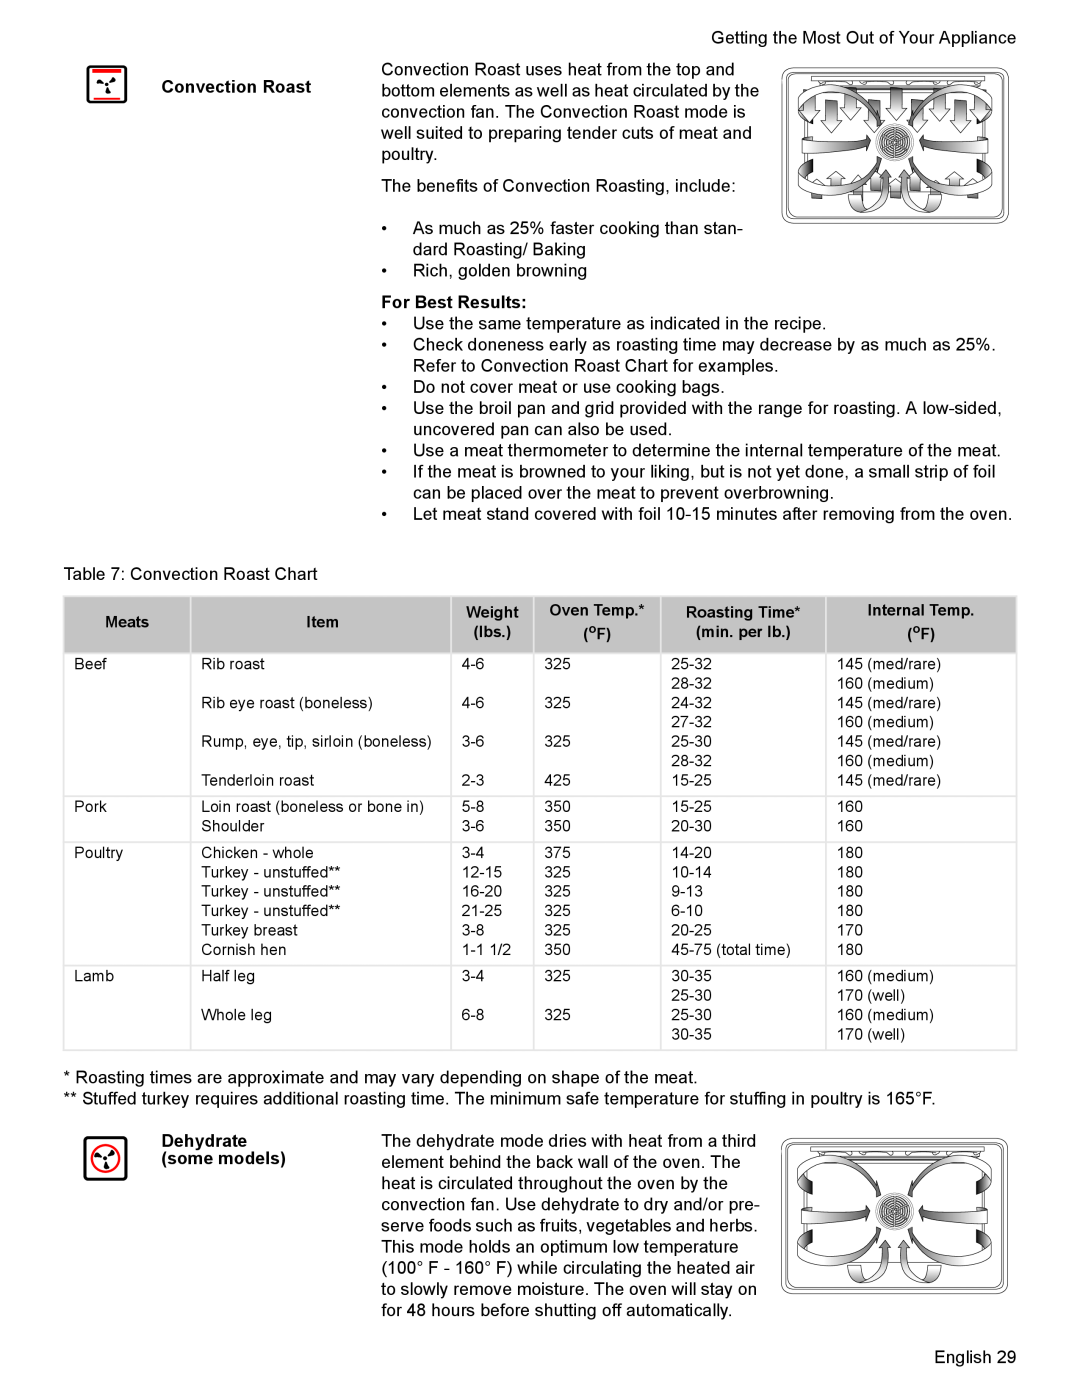 Bosch Appliances HES7052U manual For Best Results, Dehydrate some models 